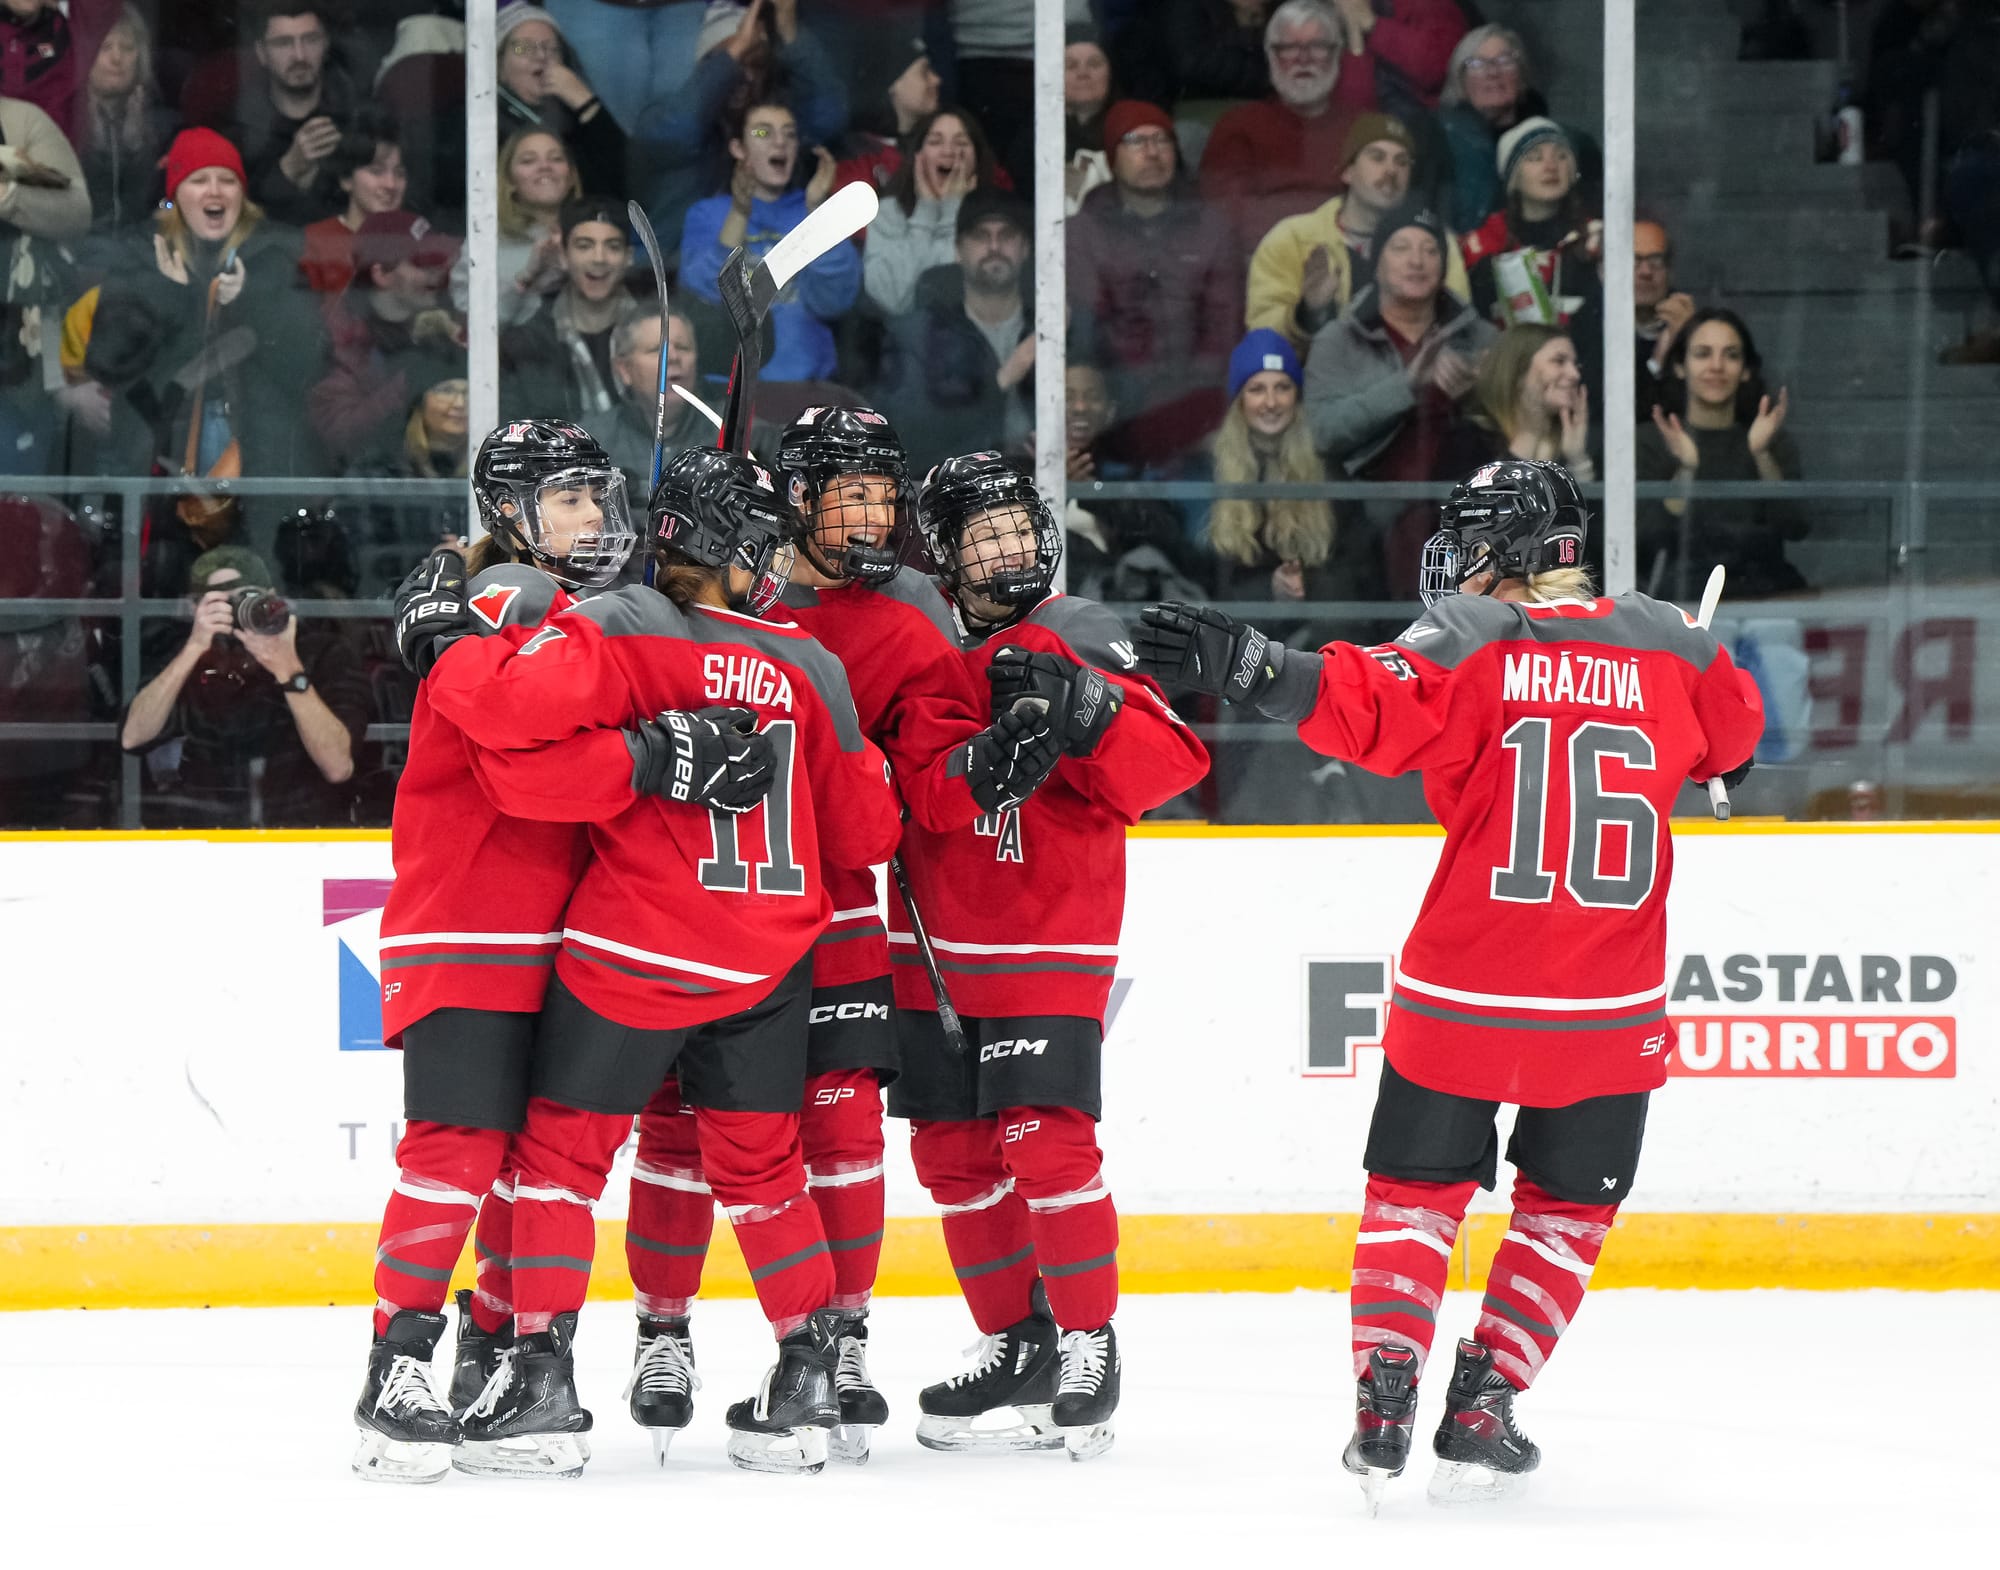 Ottawa players, wearing their red home uniforms, celebrate a goal against Minnesota. 